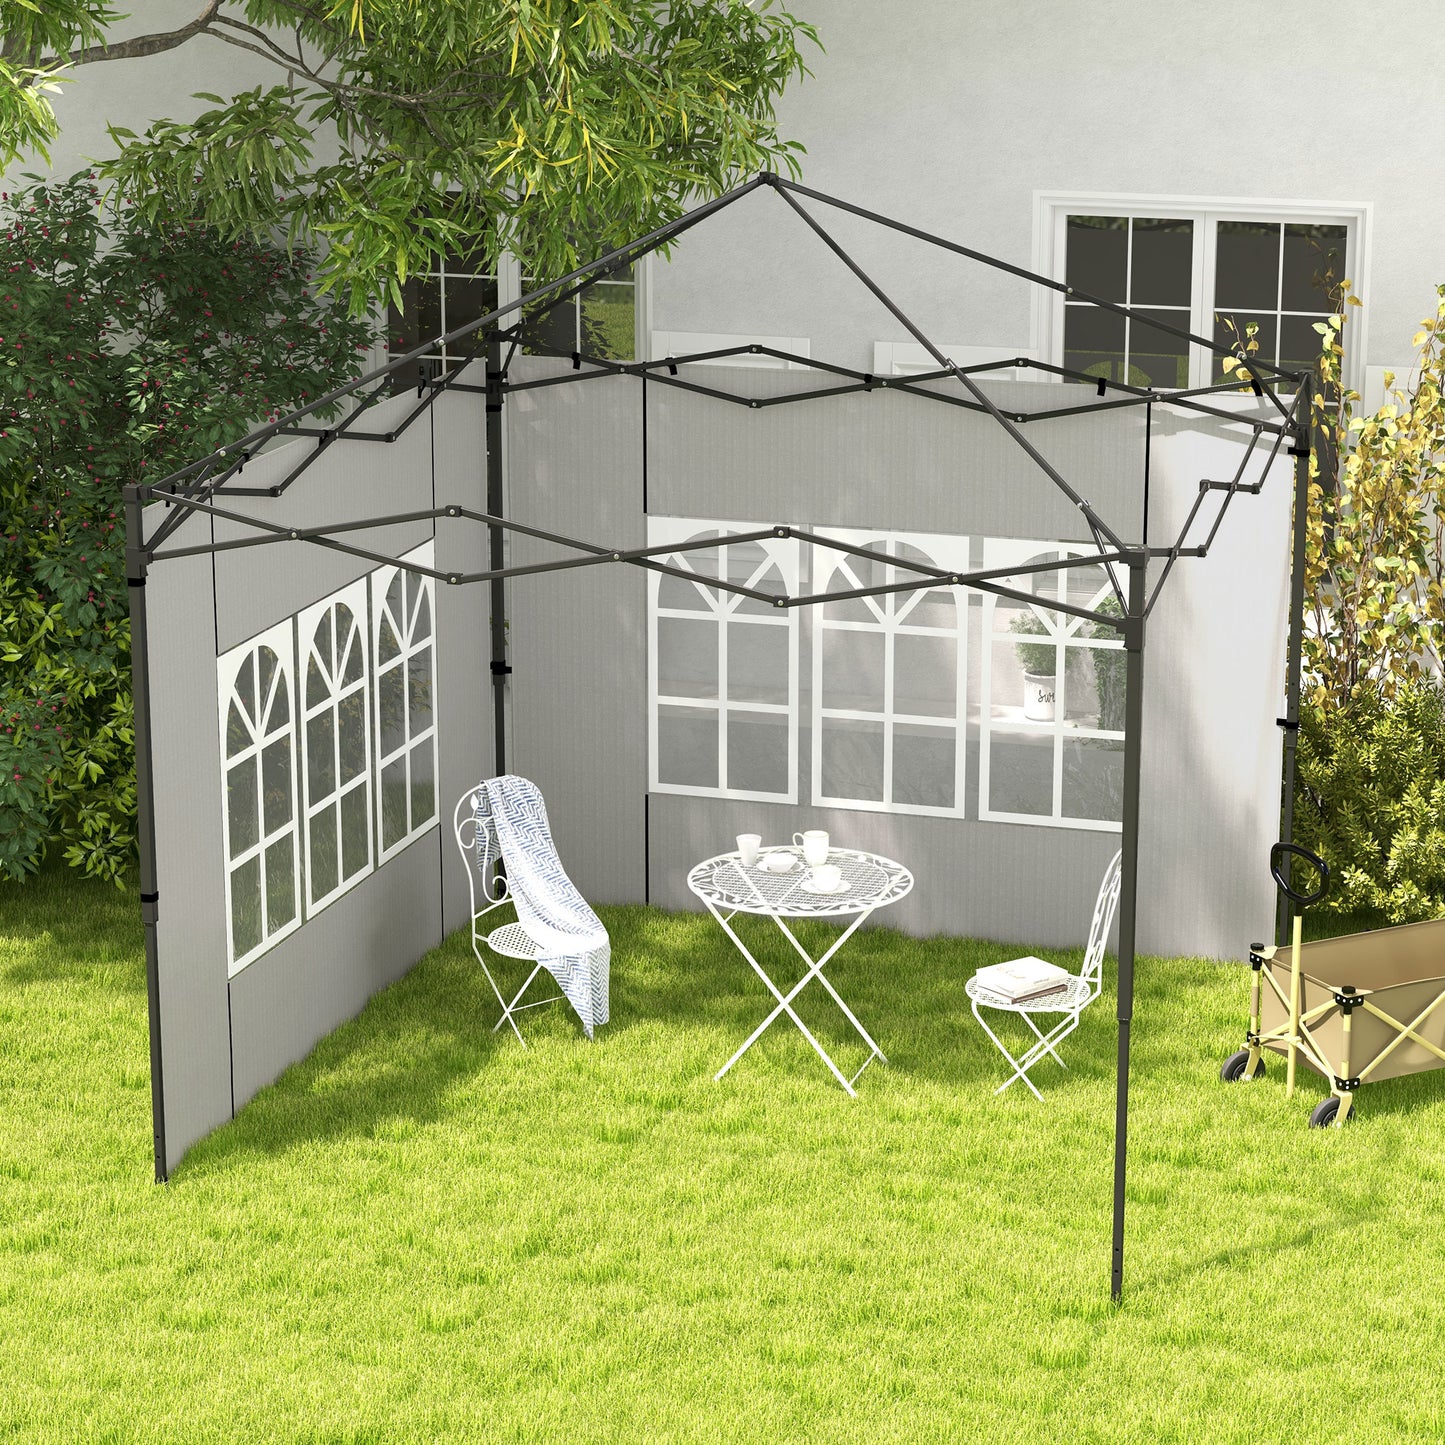 Outsunny Gazebo Side Panels, Sides Replacement with Window for 3x3(m) or 3x6m Gazebo Canopy, 2 Pack, White